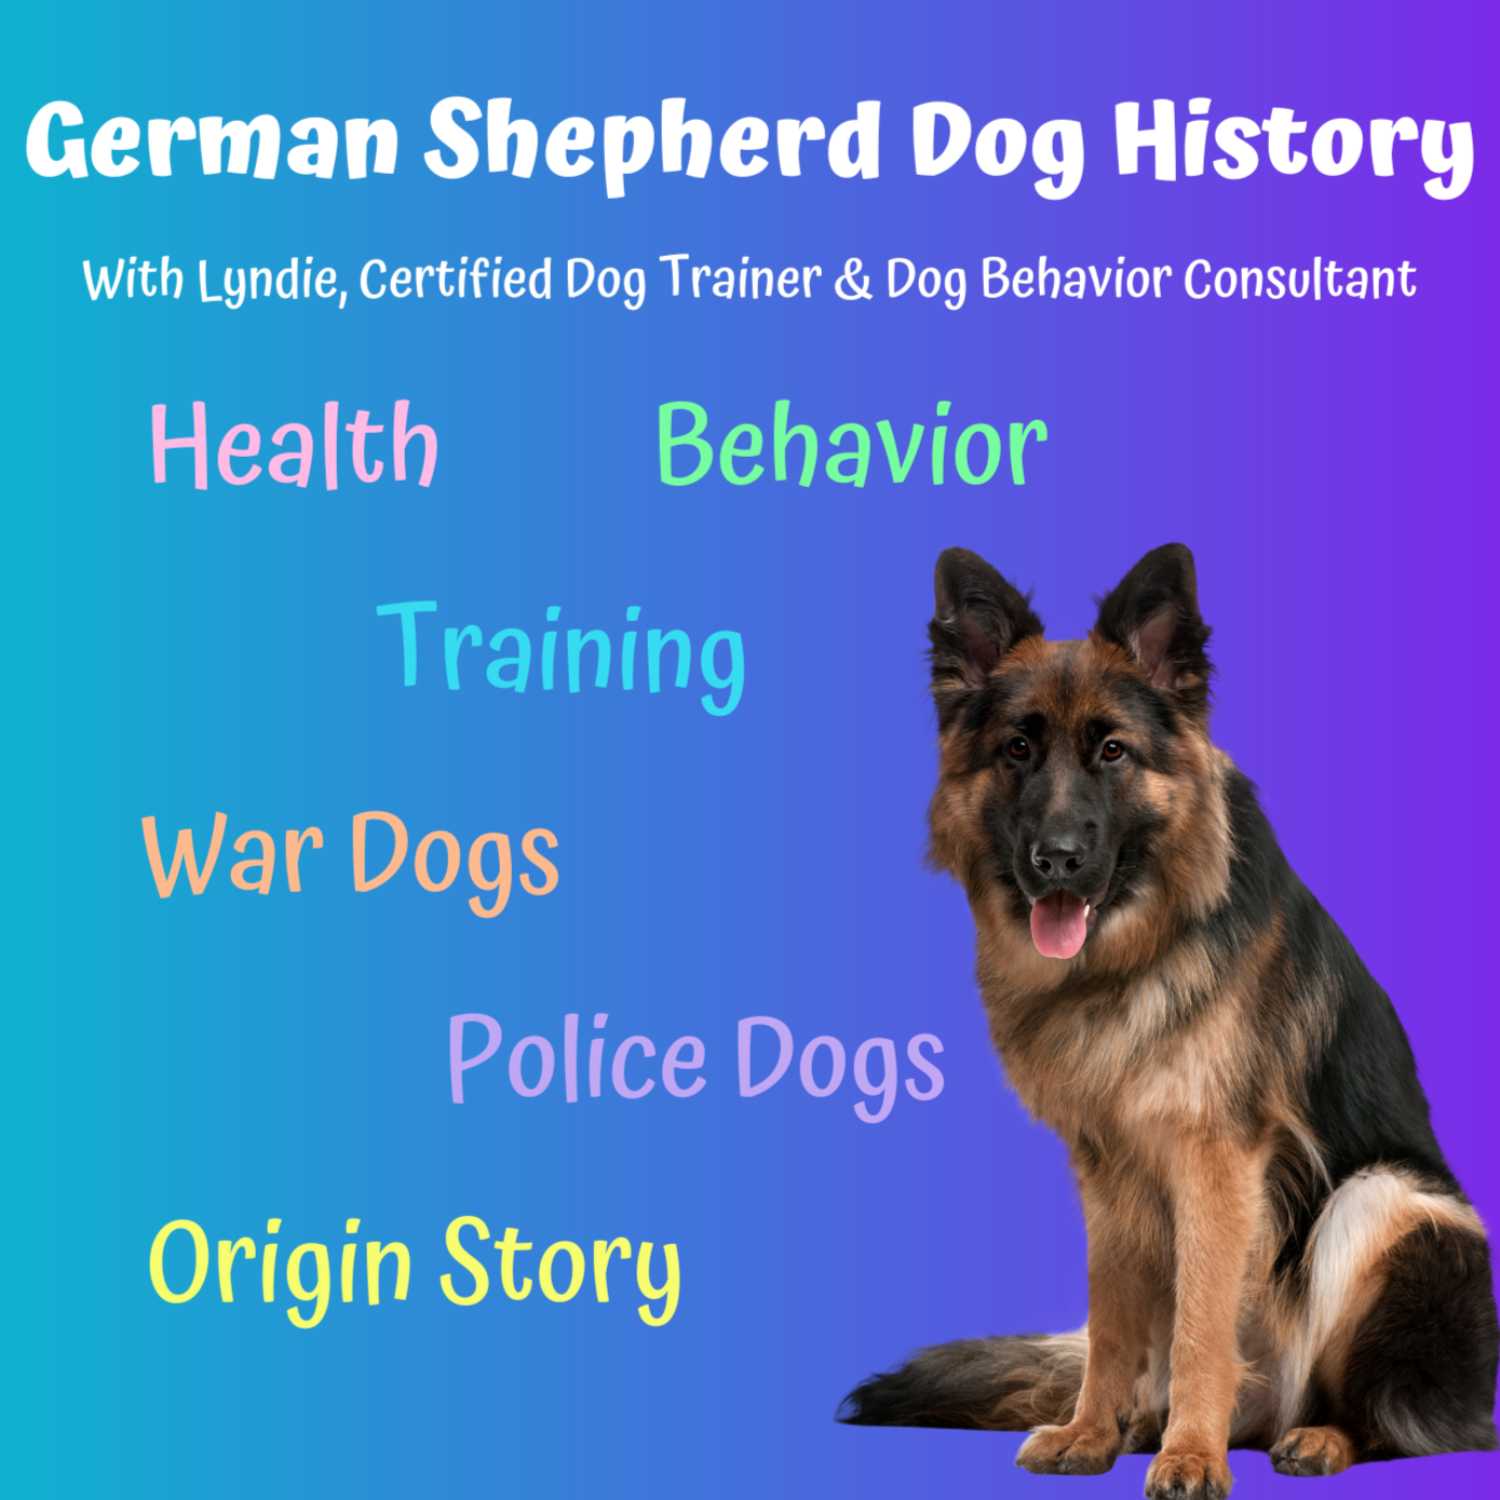 German Shepherd Dog History - GSD 101 - Everything You Need to Know About the German Shepherd Dog